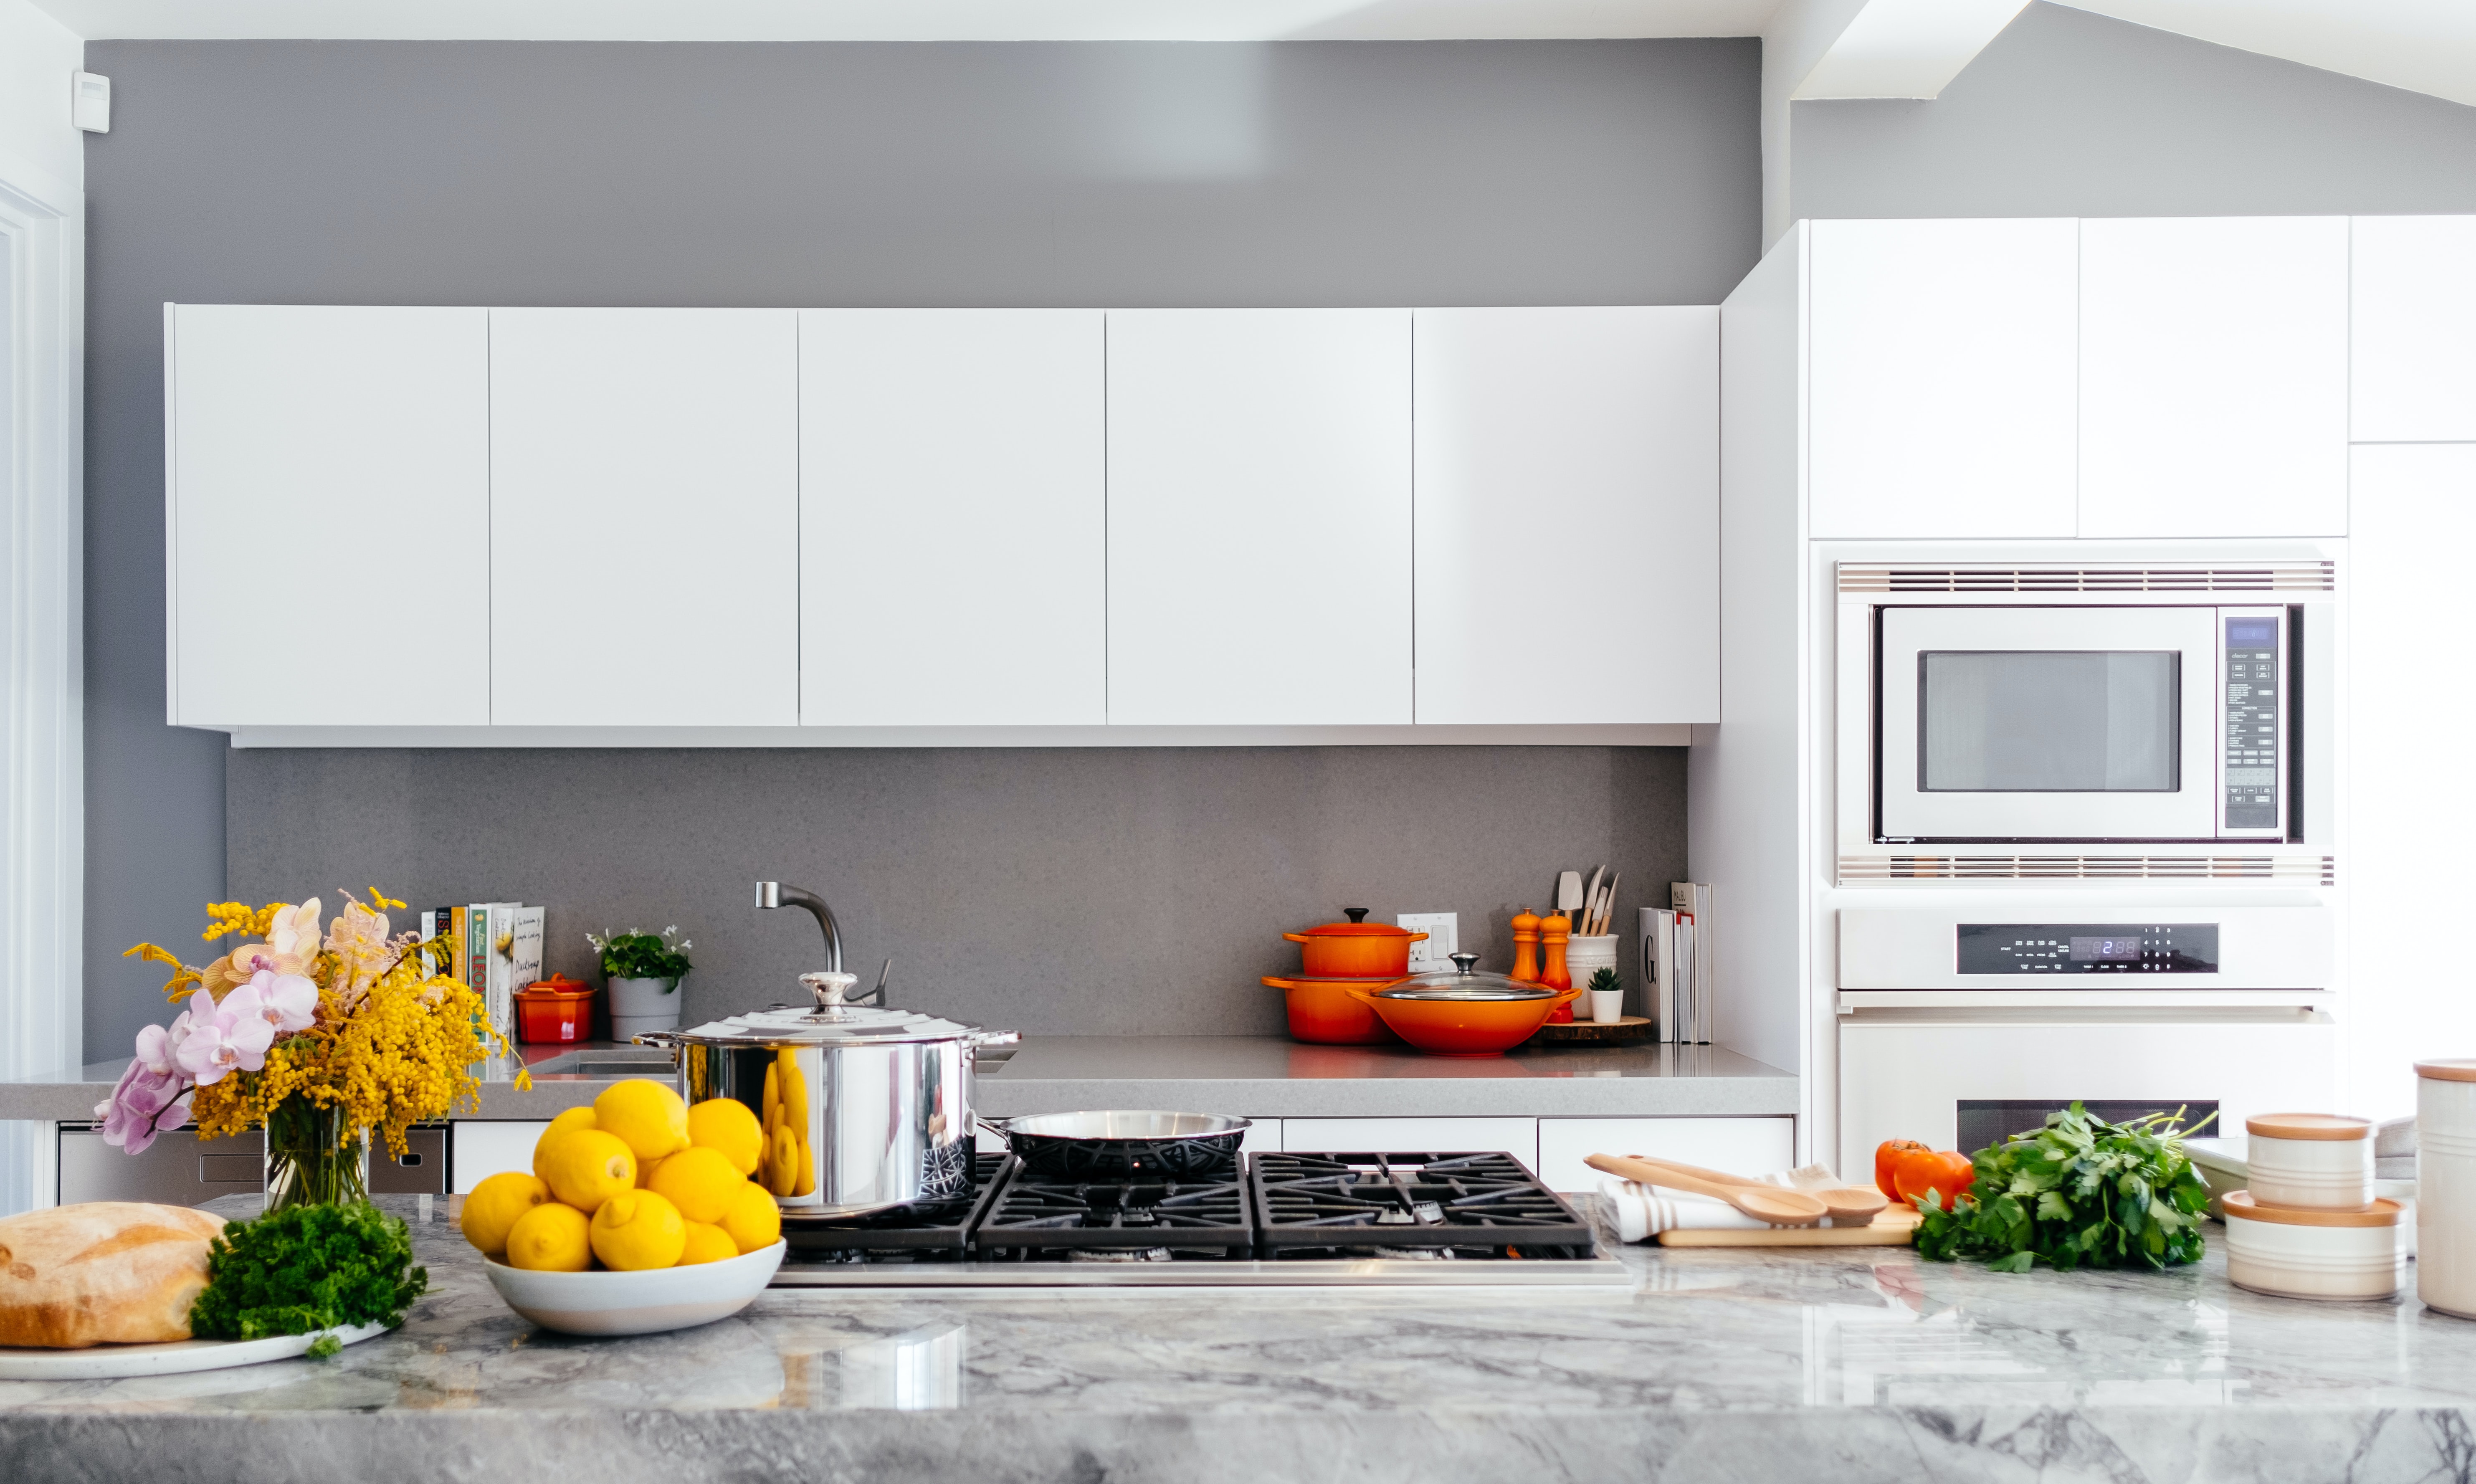 3 Off-the-Wall Organizational Tricks for Your Kitchen's featured image